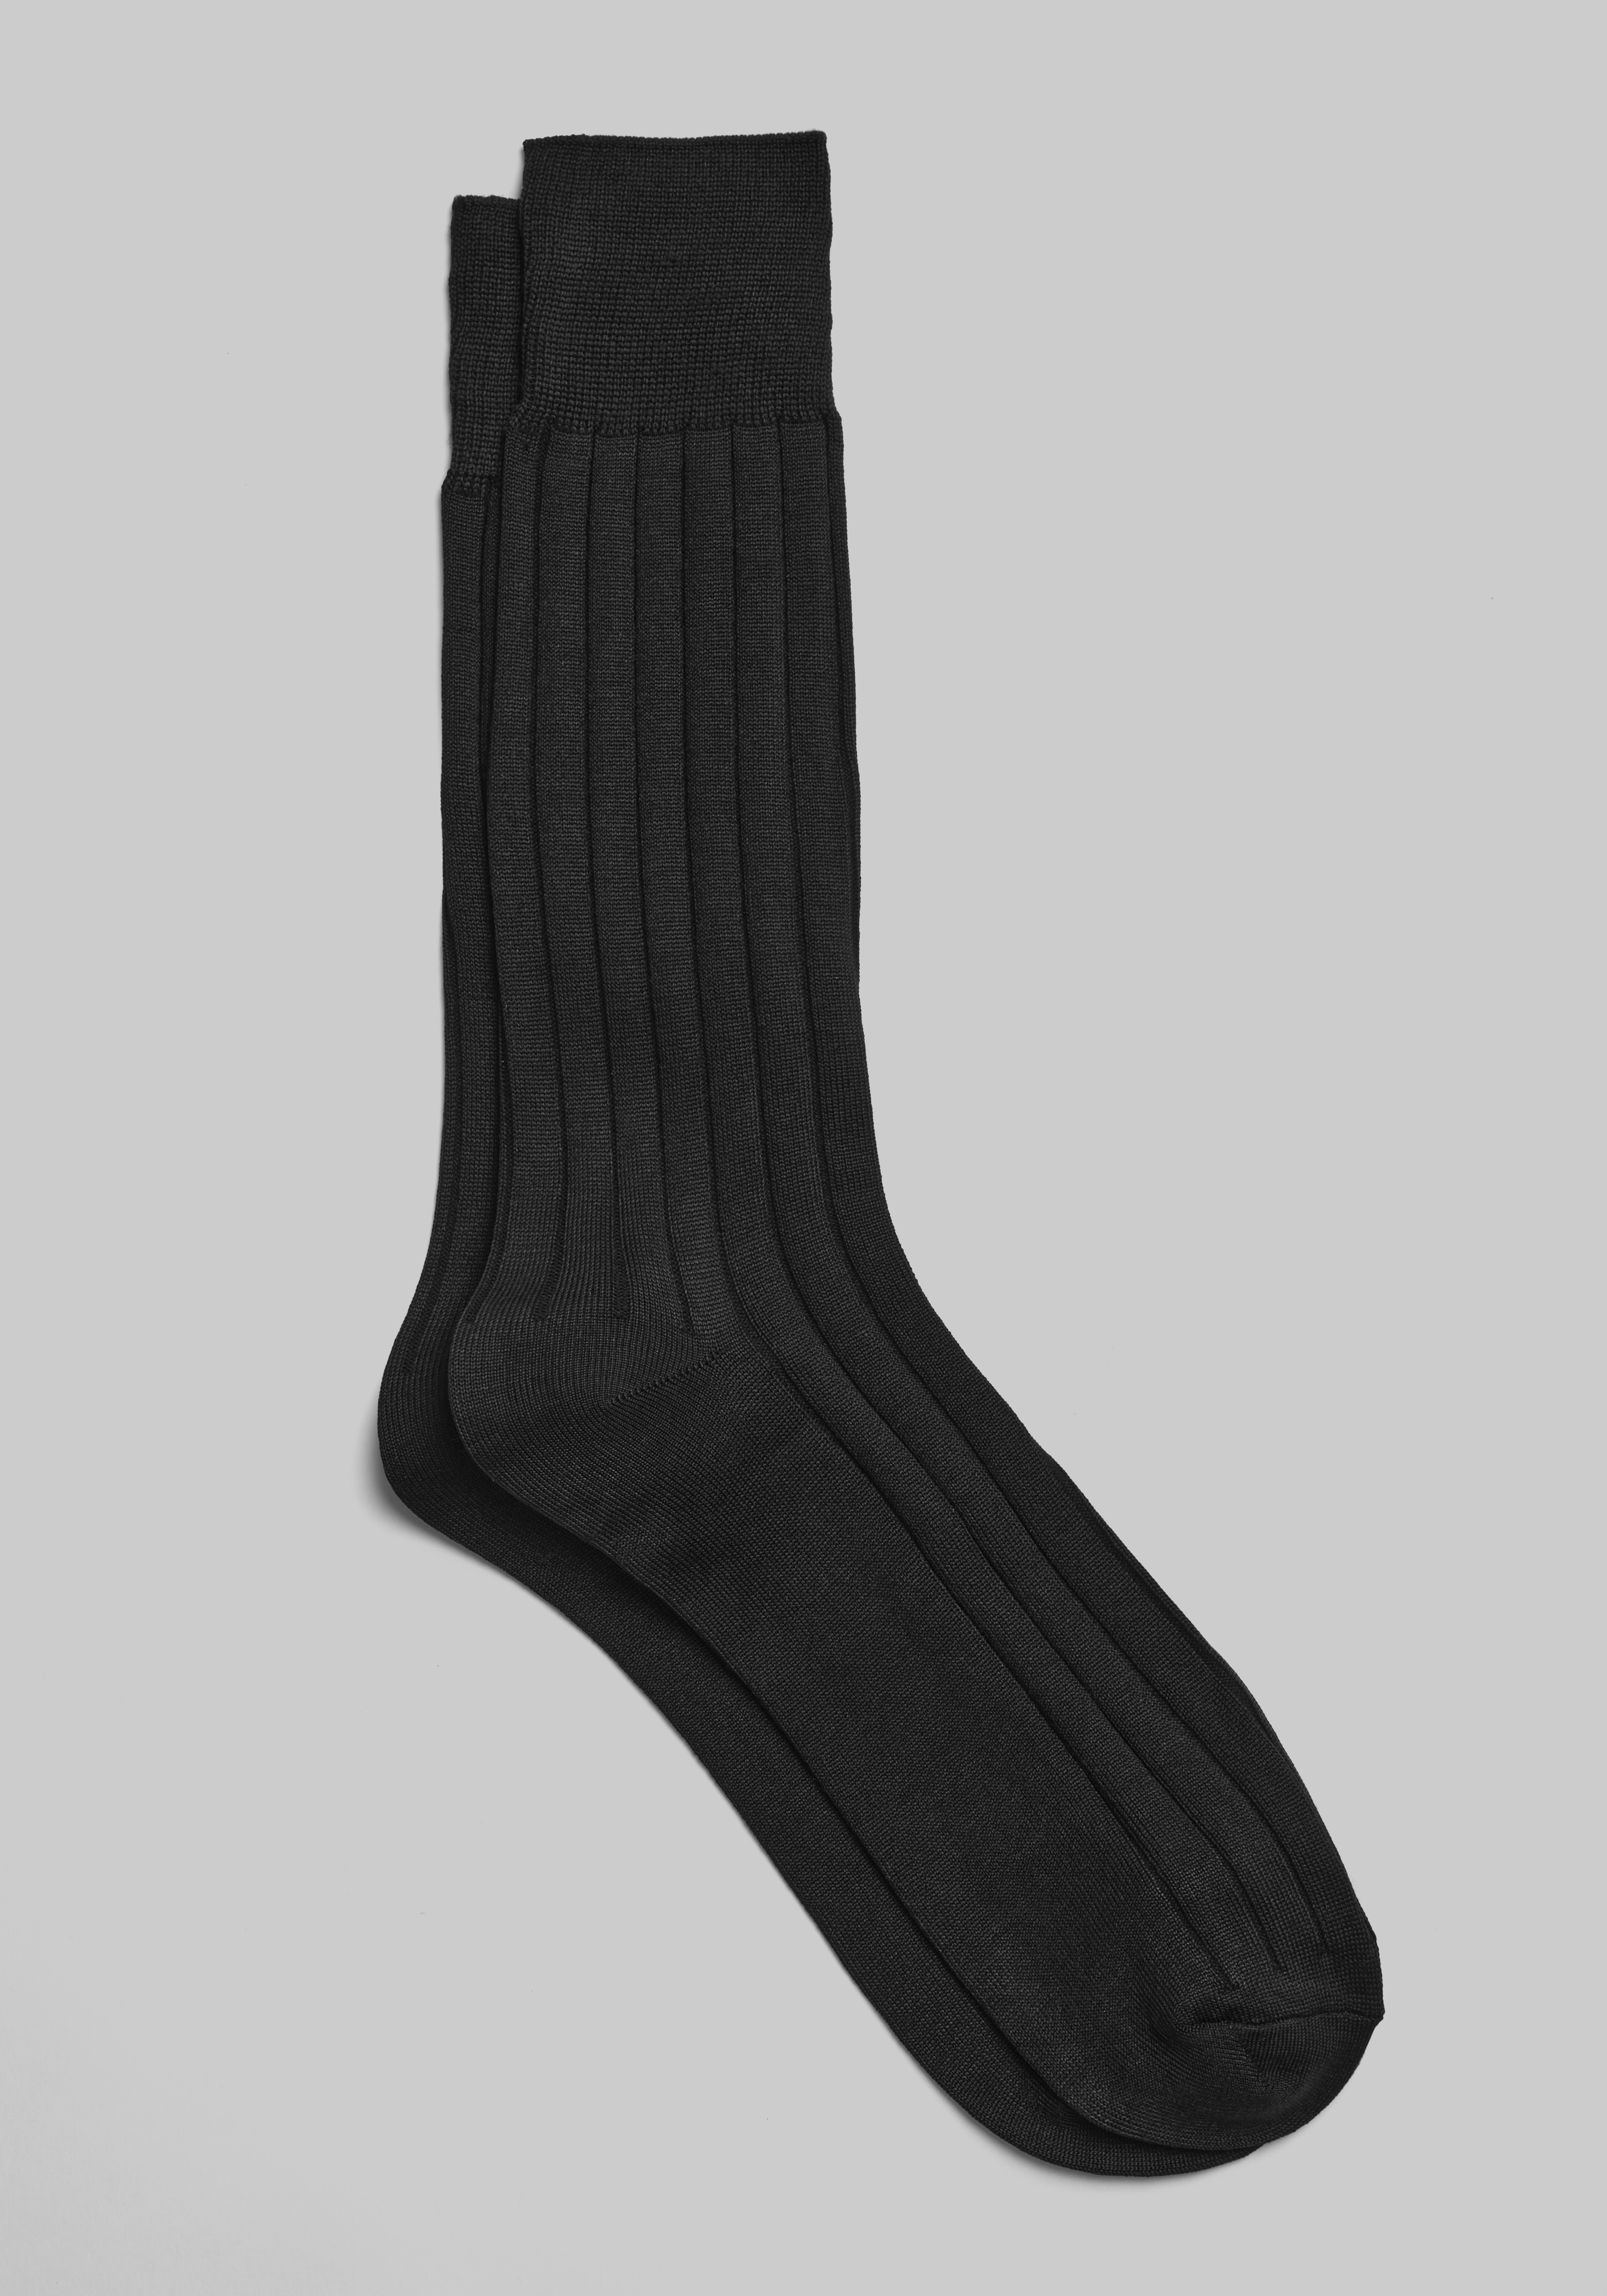 Jos. A. Bank Ribbed Socks - Father's Day Gifts Under $25 | Jos A Bank